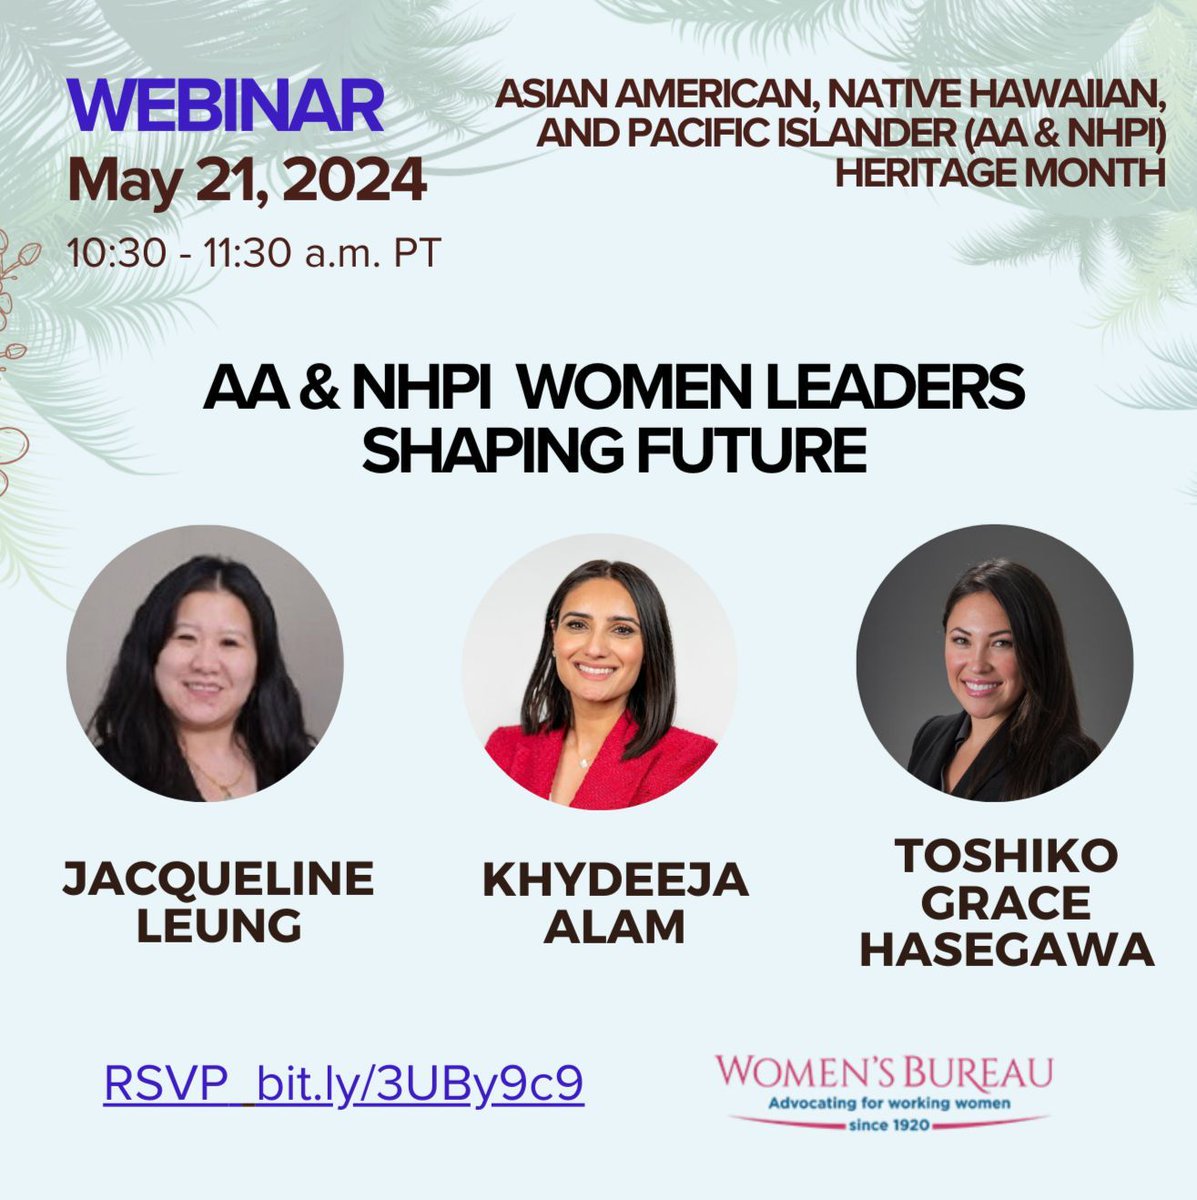 OCAPIA is excited to announce Co-Chair Jacqueline Leung will be on the AANHPI Women Leaders Shaping Future panel hosted by the @WB_DOL!

This is a virtual event, show your support by tuning in on May 21, 2024.

Register at buff.ly/3yjNQM5

#WomenLeaders #AANHPI